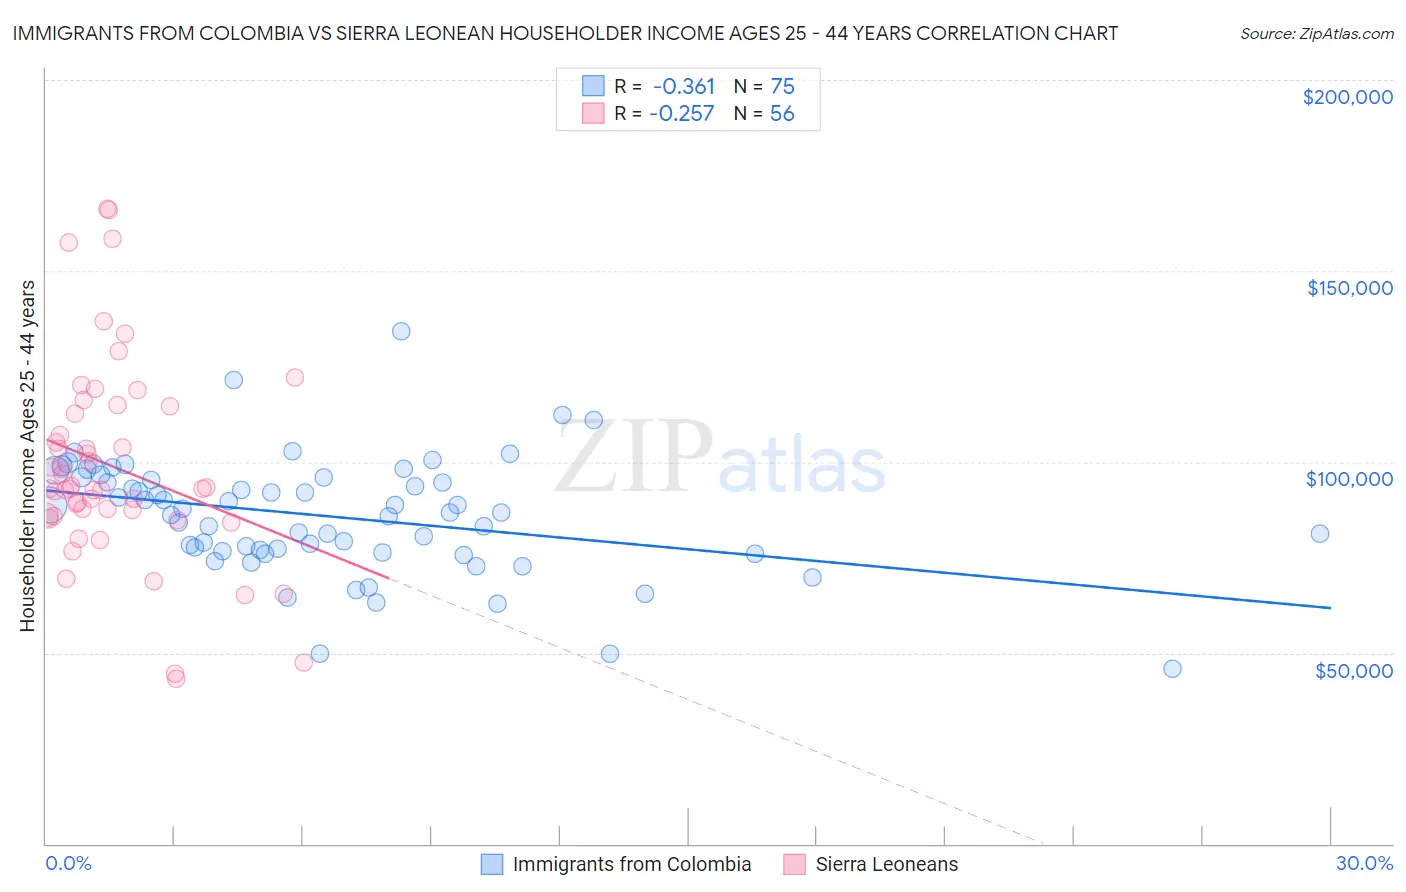 Immigrants from Colombia vs Sierra Leonean Householder Income Ages 25 - 44 years